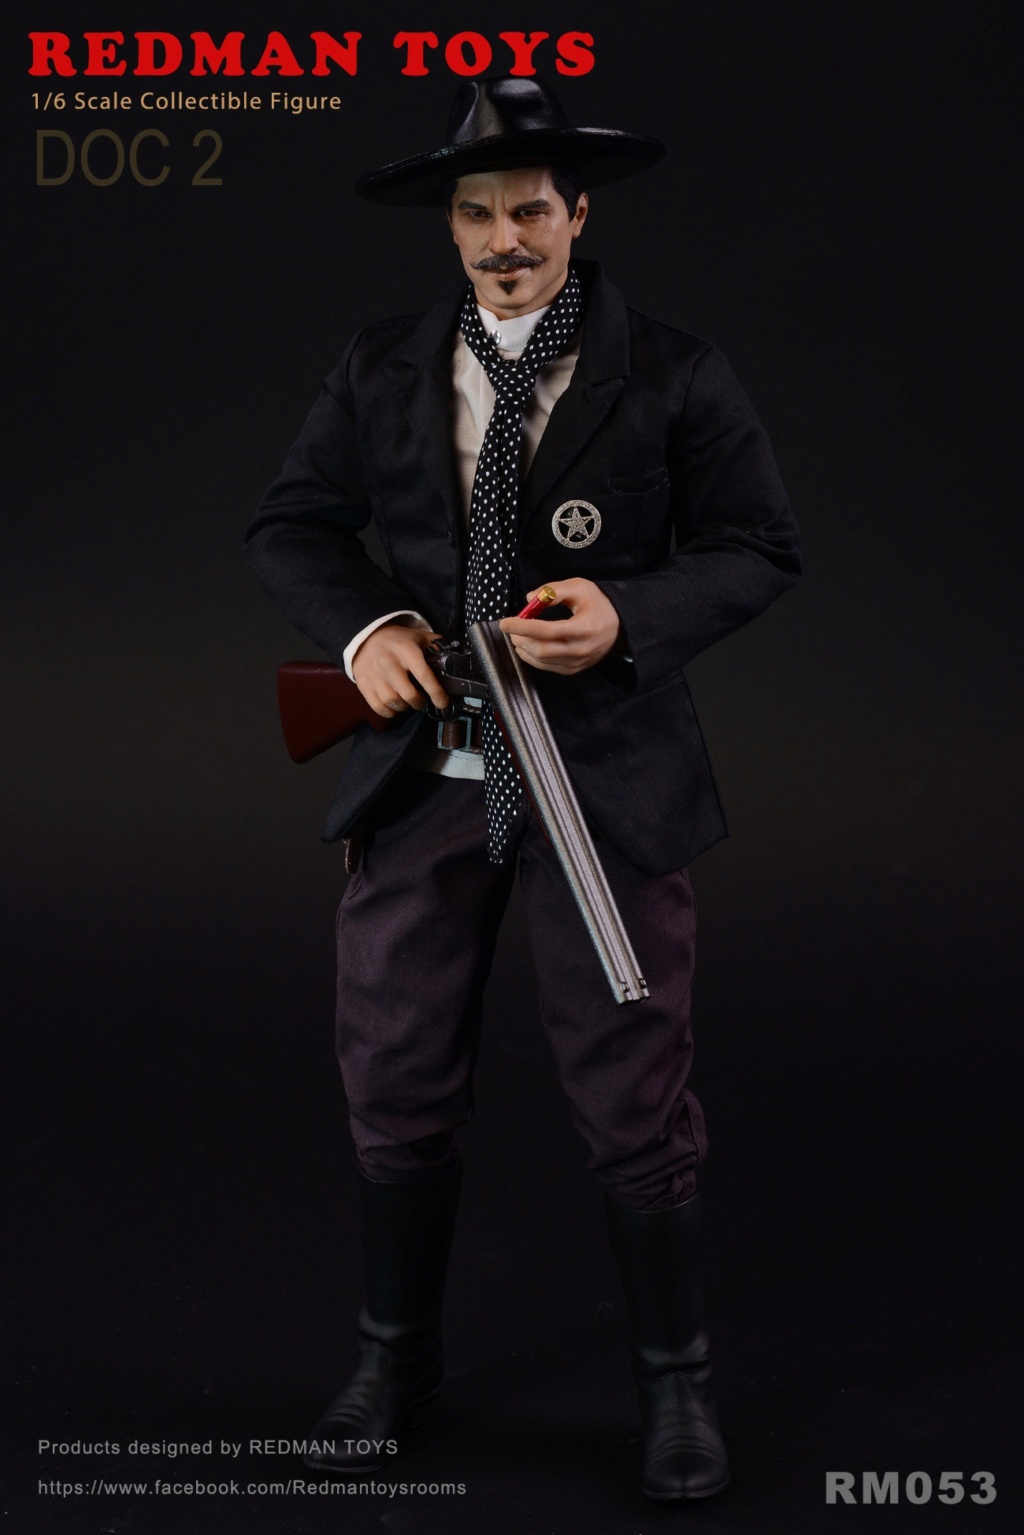 RedmanToys - NEW PRODUCT: Redman Toys: 1/6 Tombstone Town-DOC 1, DOC 2, Town Marshal 02475310